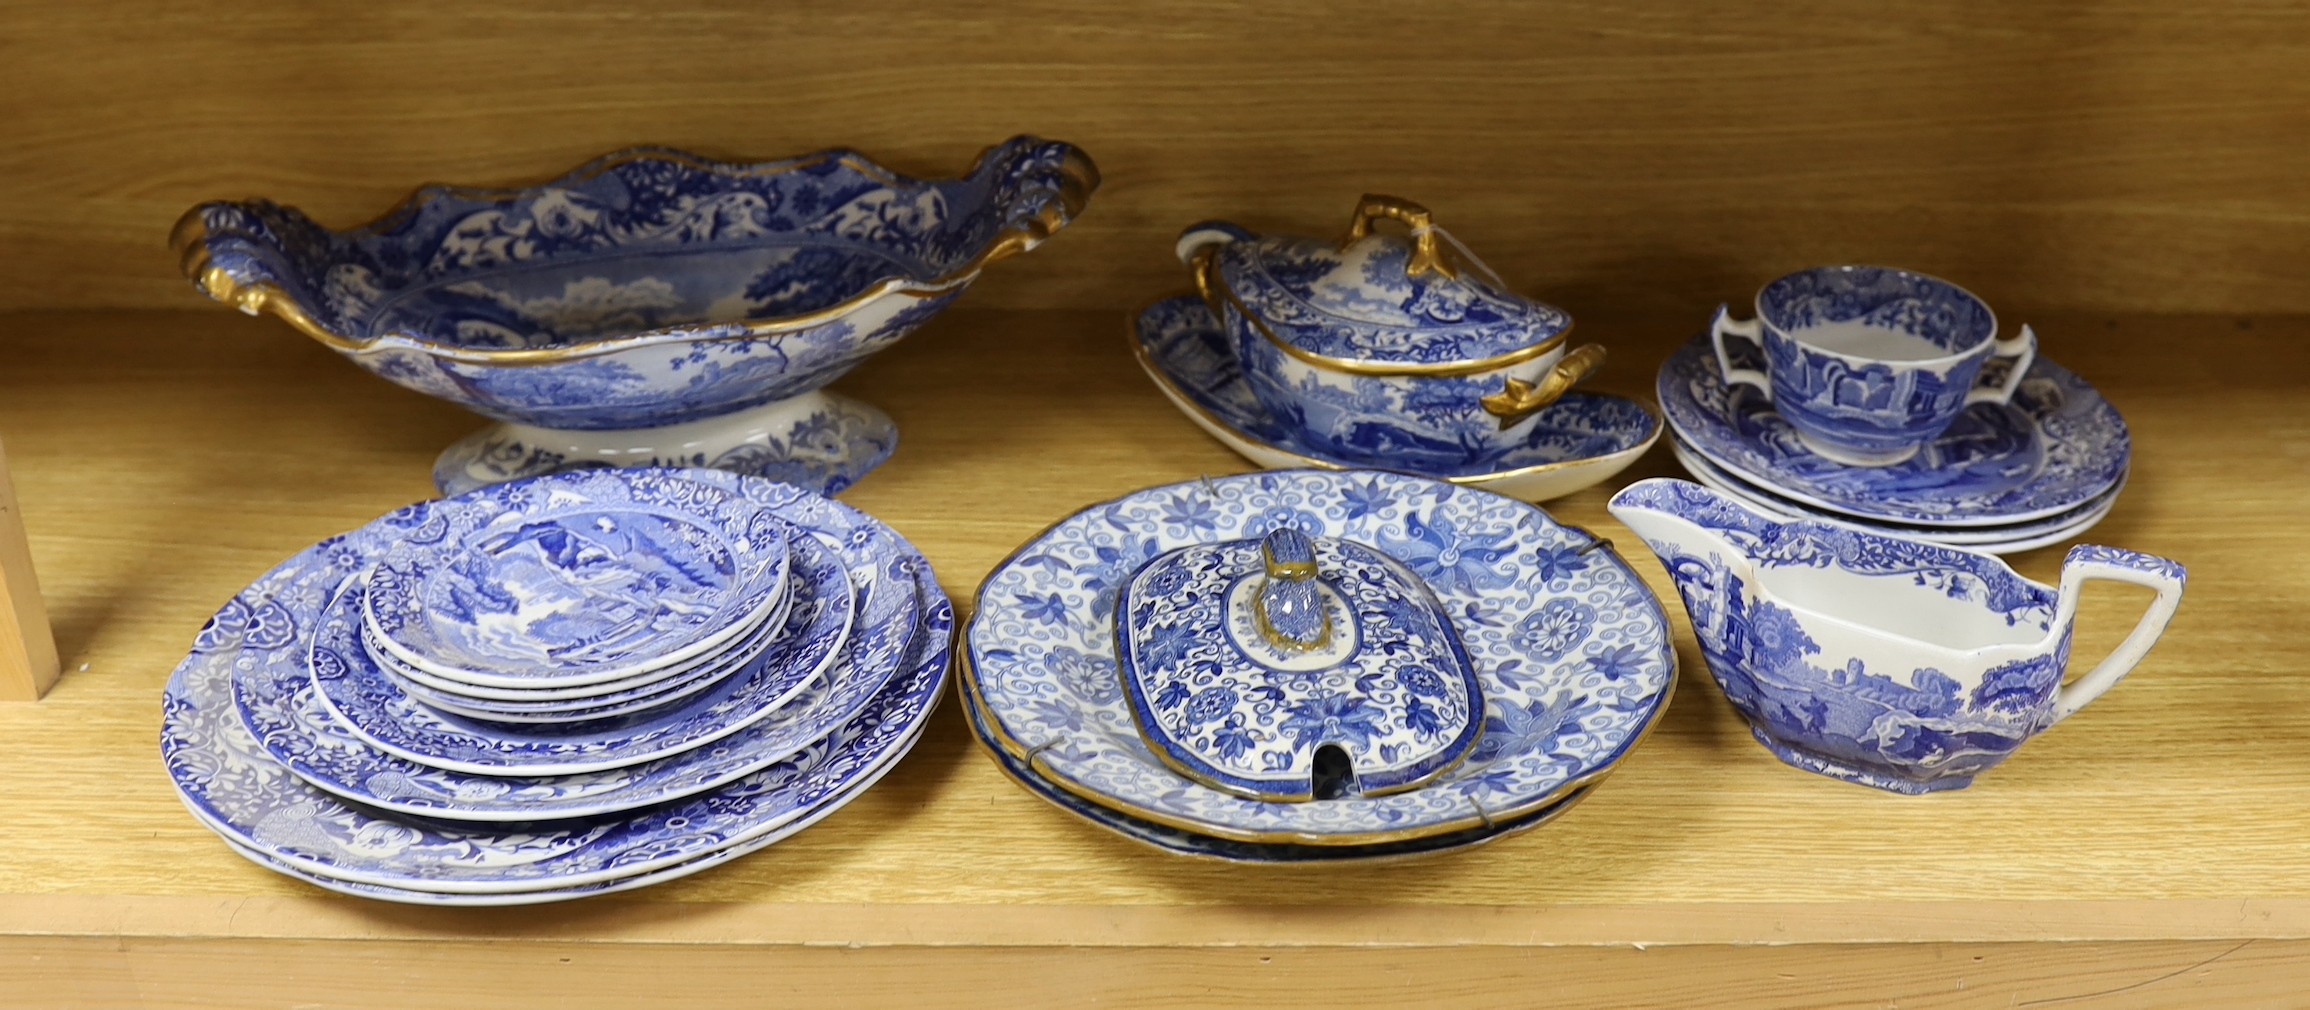 Spode Italian blue and white dessert and tea wares, 19th century and modern and other 19th century blue and white wares